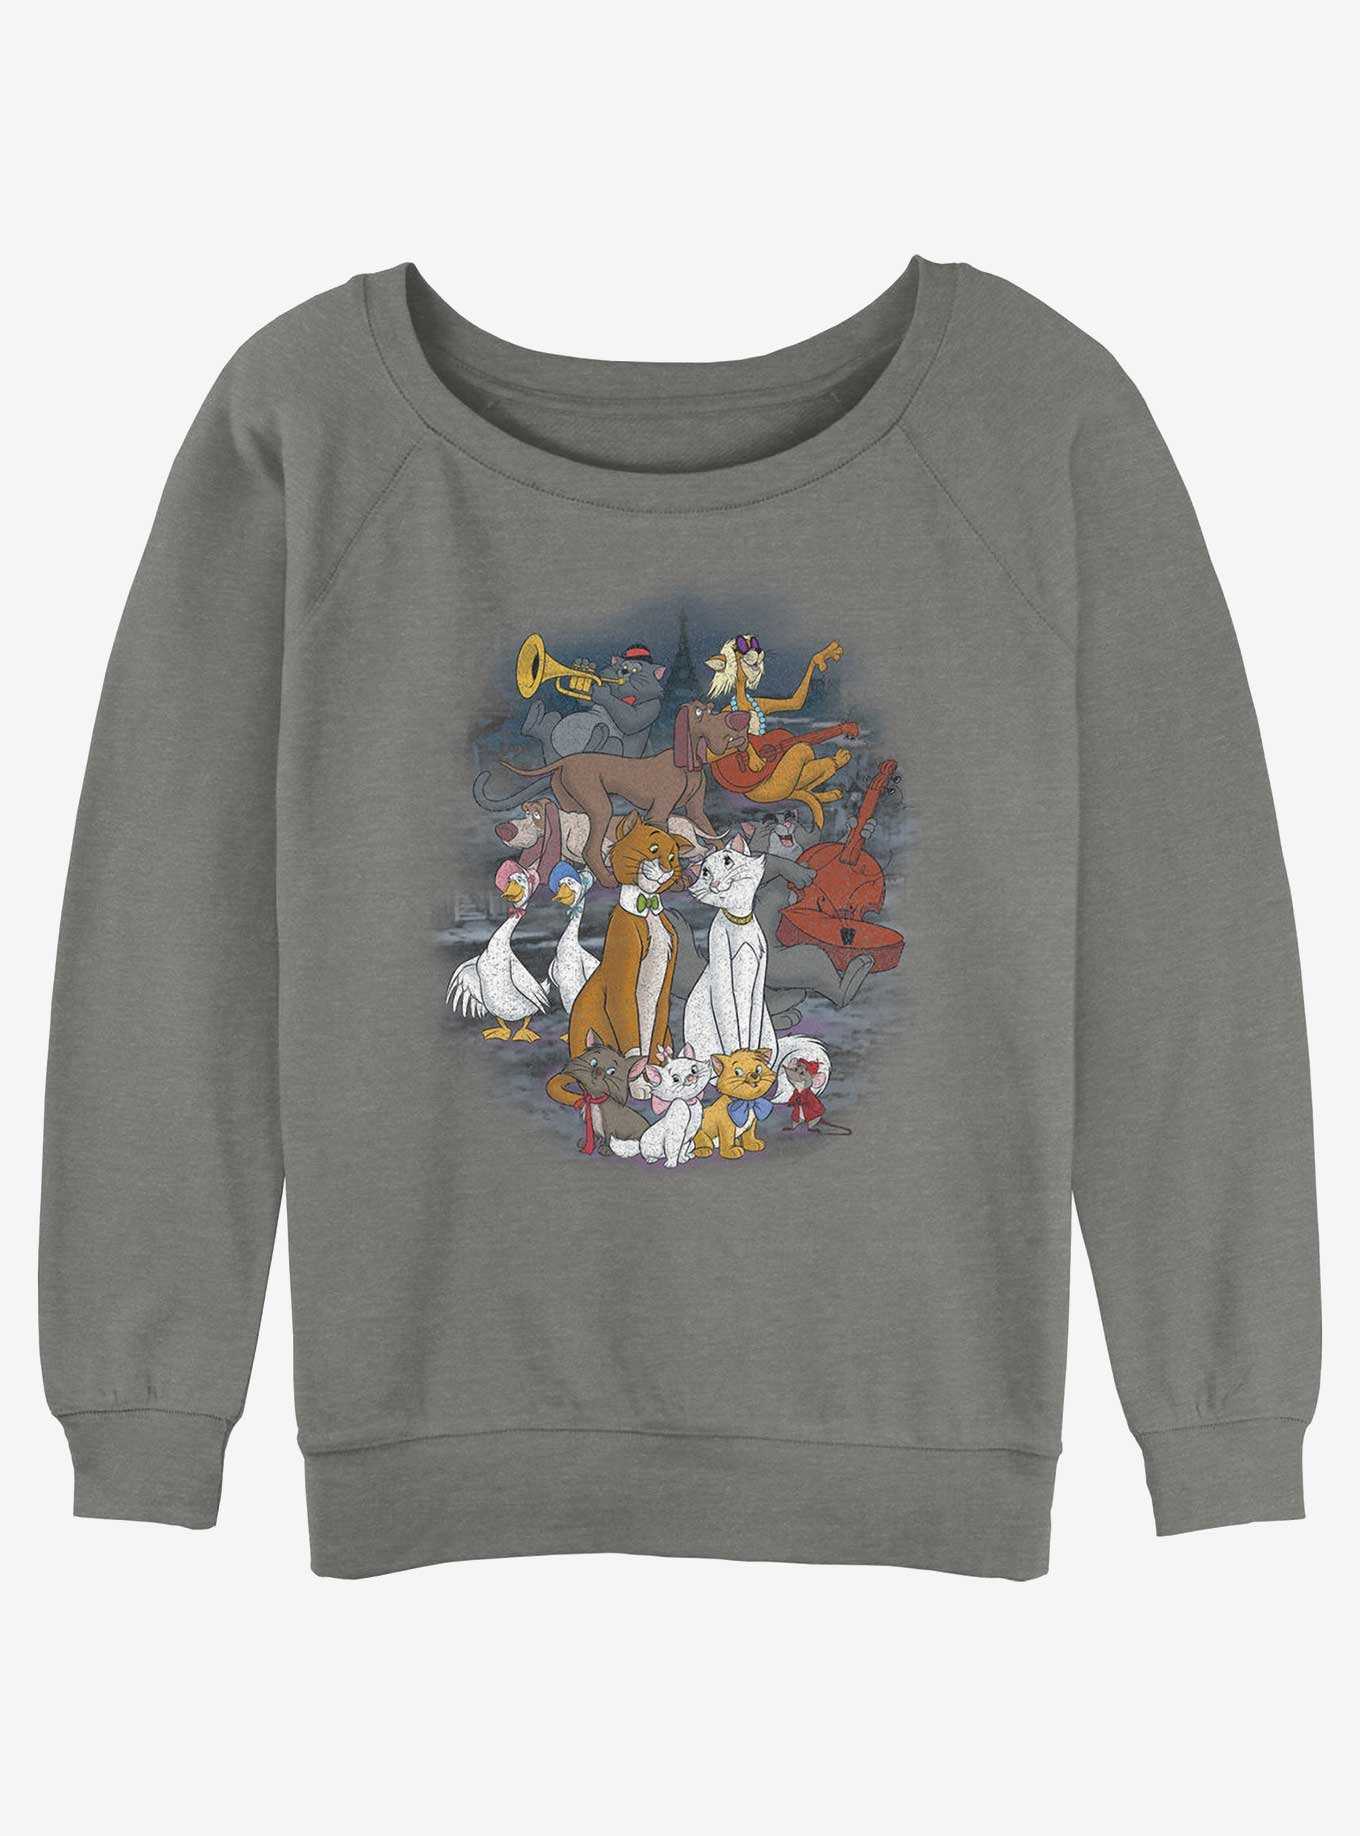 Merch Hot Plushies, | & OFFICIAL Shirts Topic Aristocats